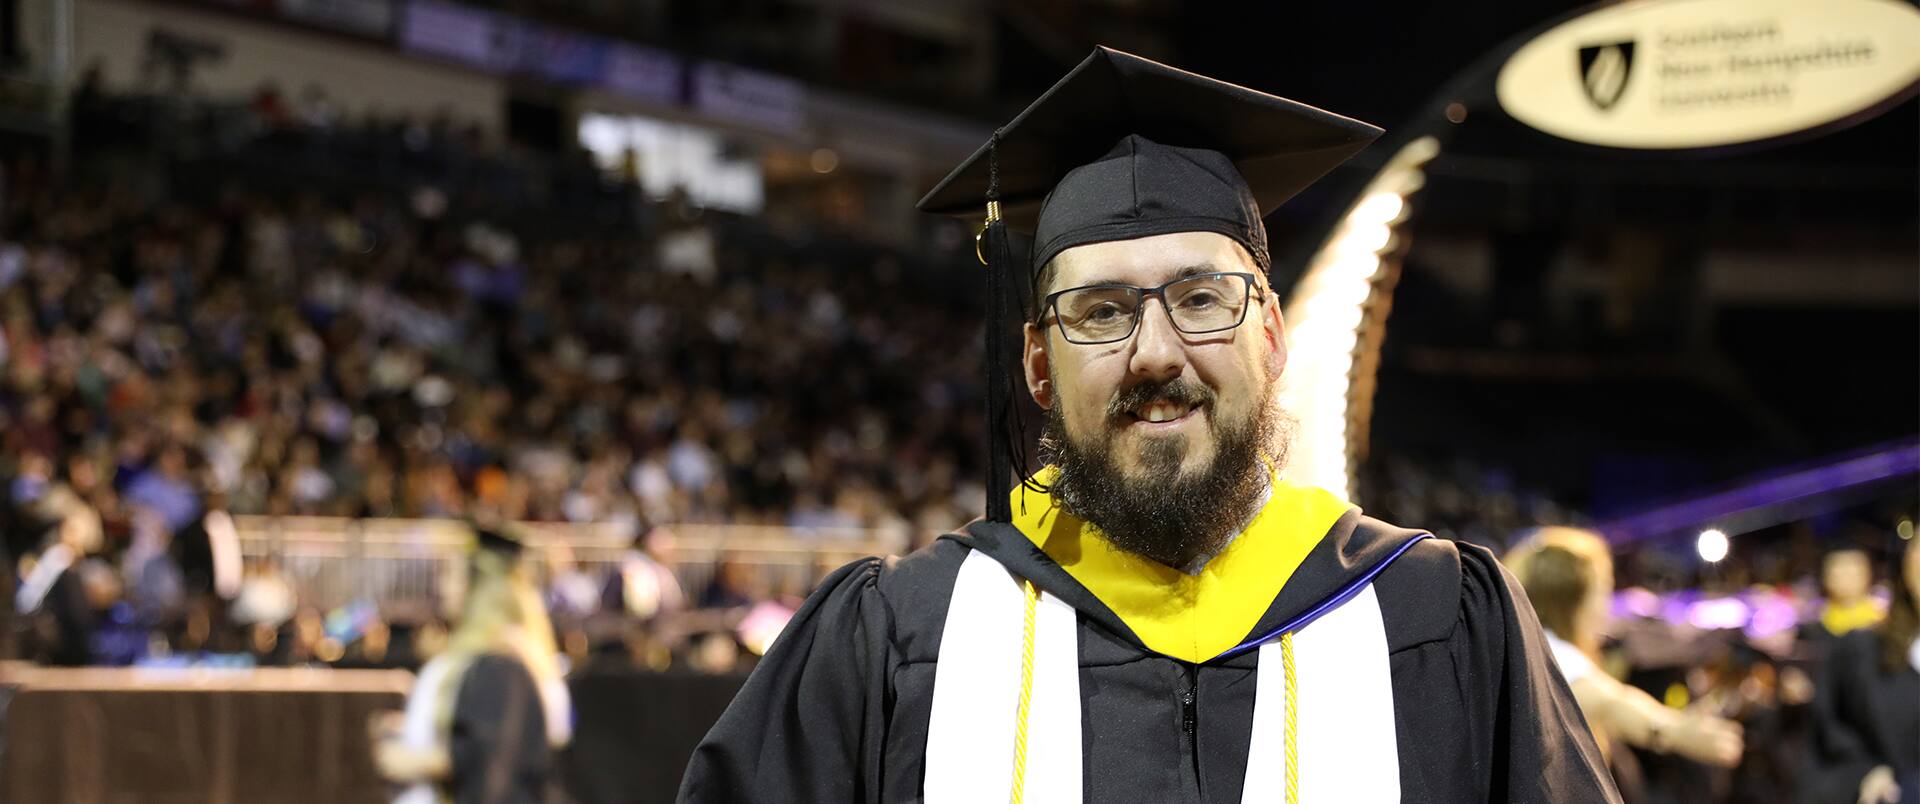 Michael Richards, clad in cap and gown at the 2023 SNHU commencement ceremony after earning his software engineering degree online.